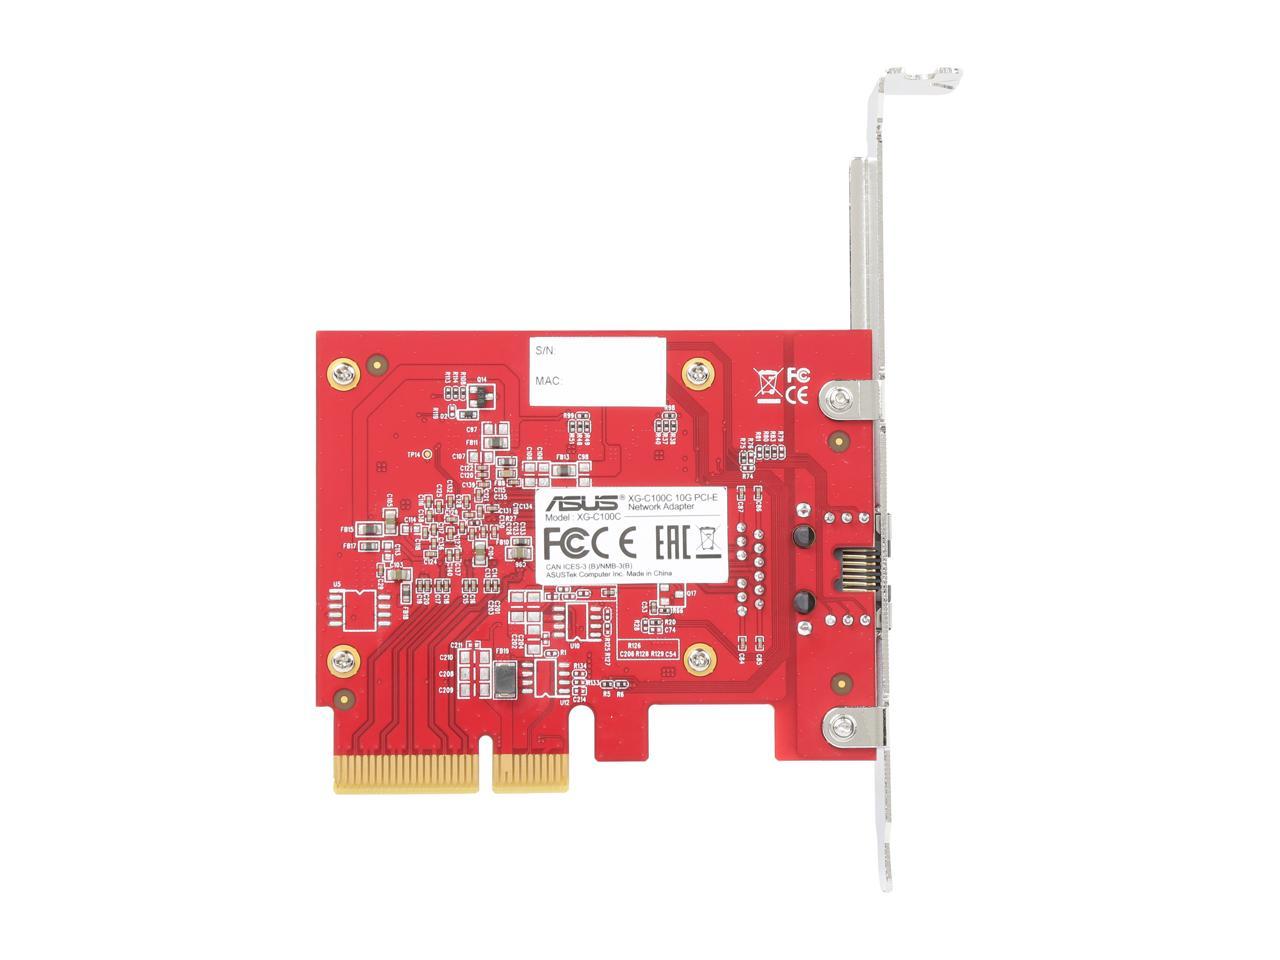 ASUS XG-C100C 10G Network Adapter PCI-E x4 Card with Single RJ-45 Port